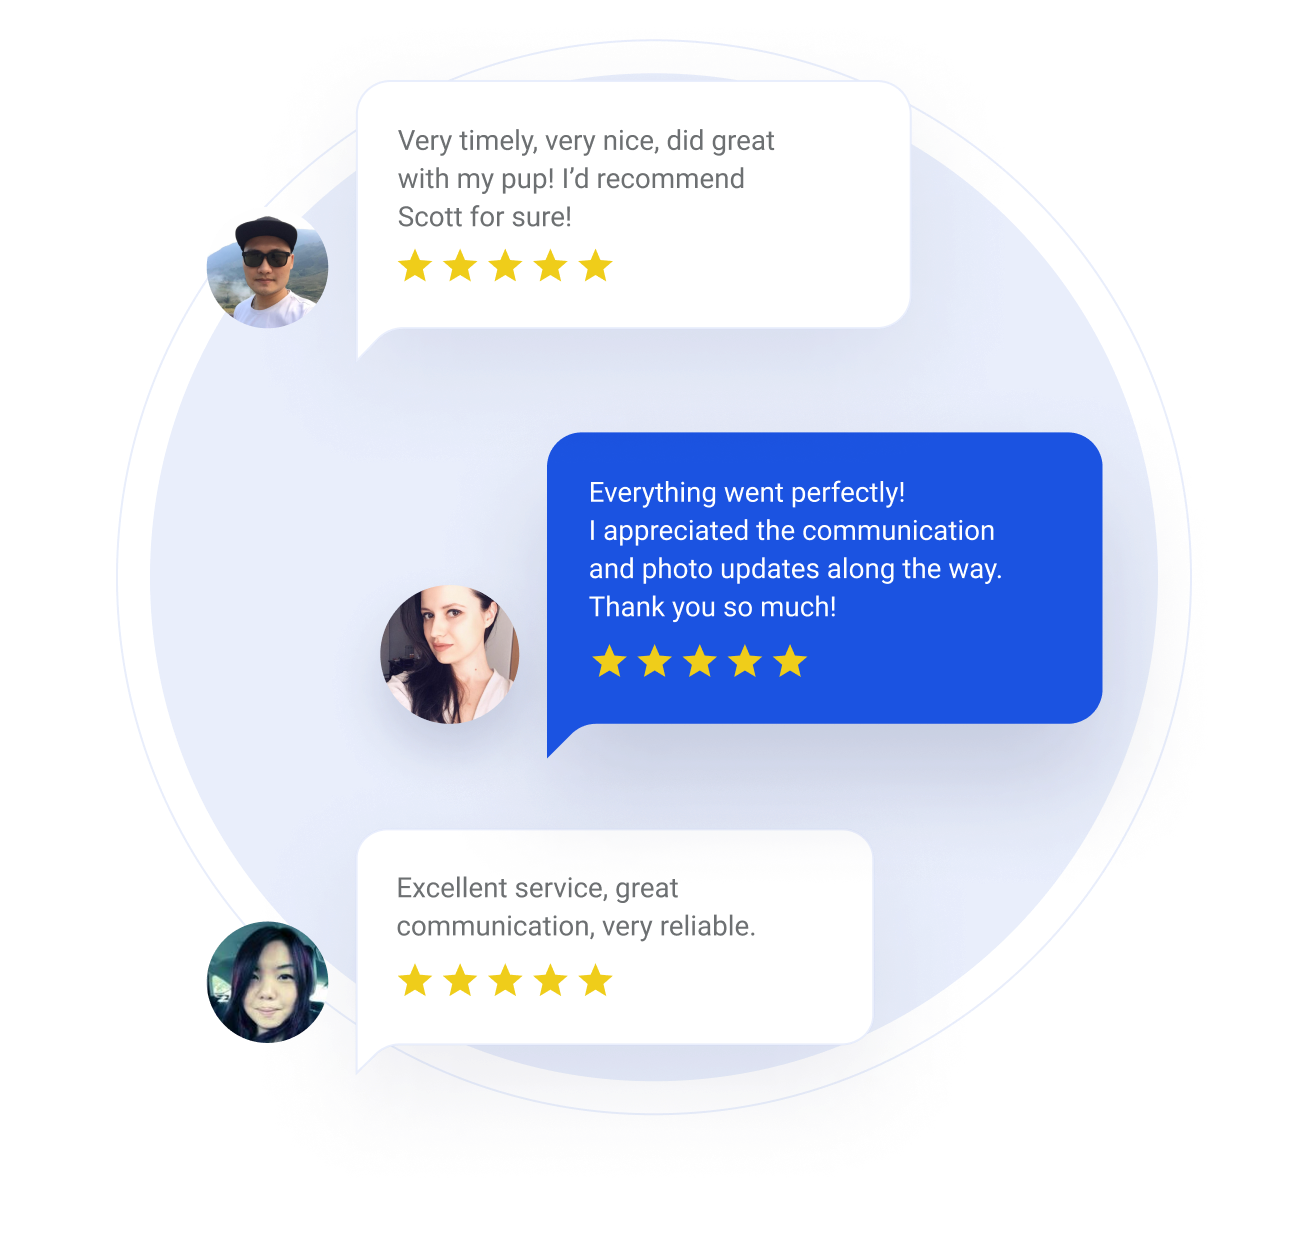 Three user testimonials presented as chat bubbles with star ratings, highlighting positive service experiences.